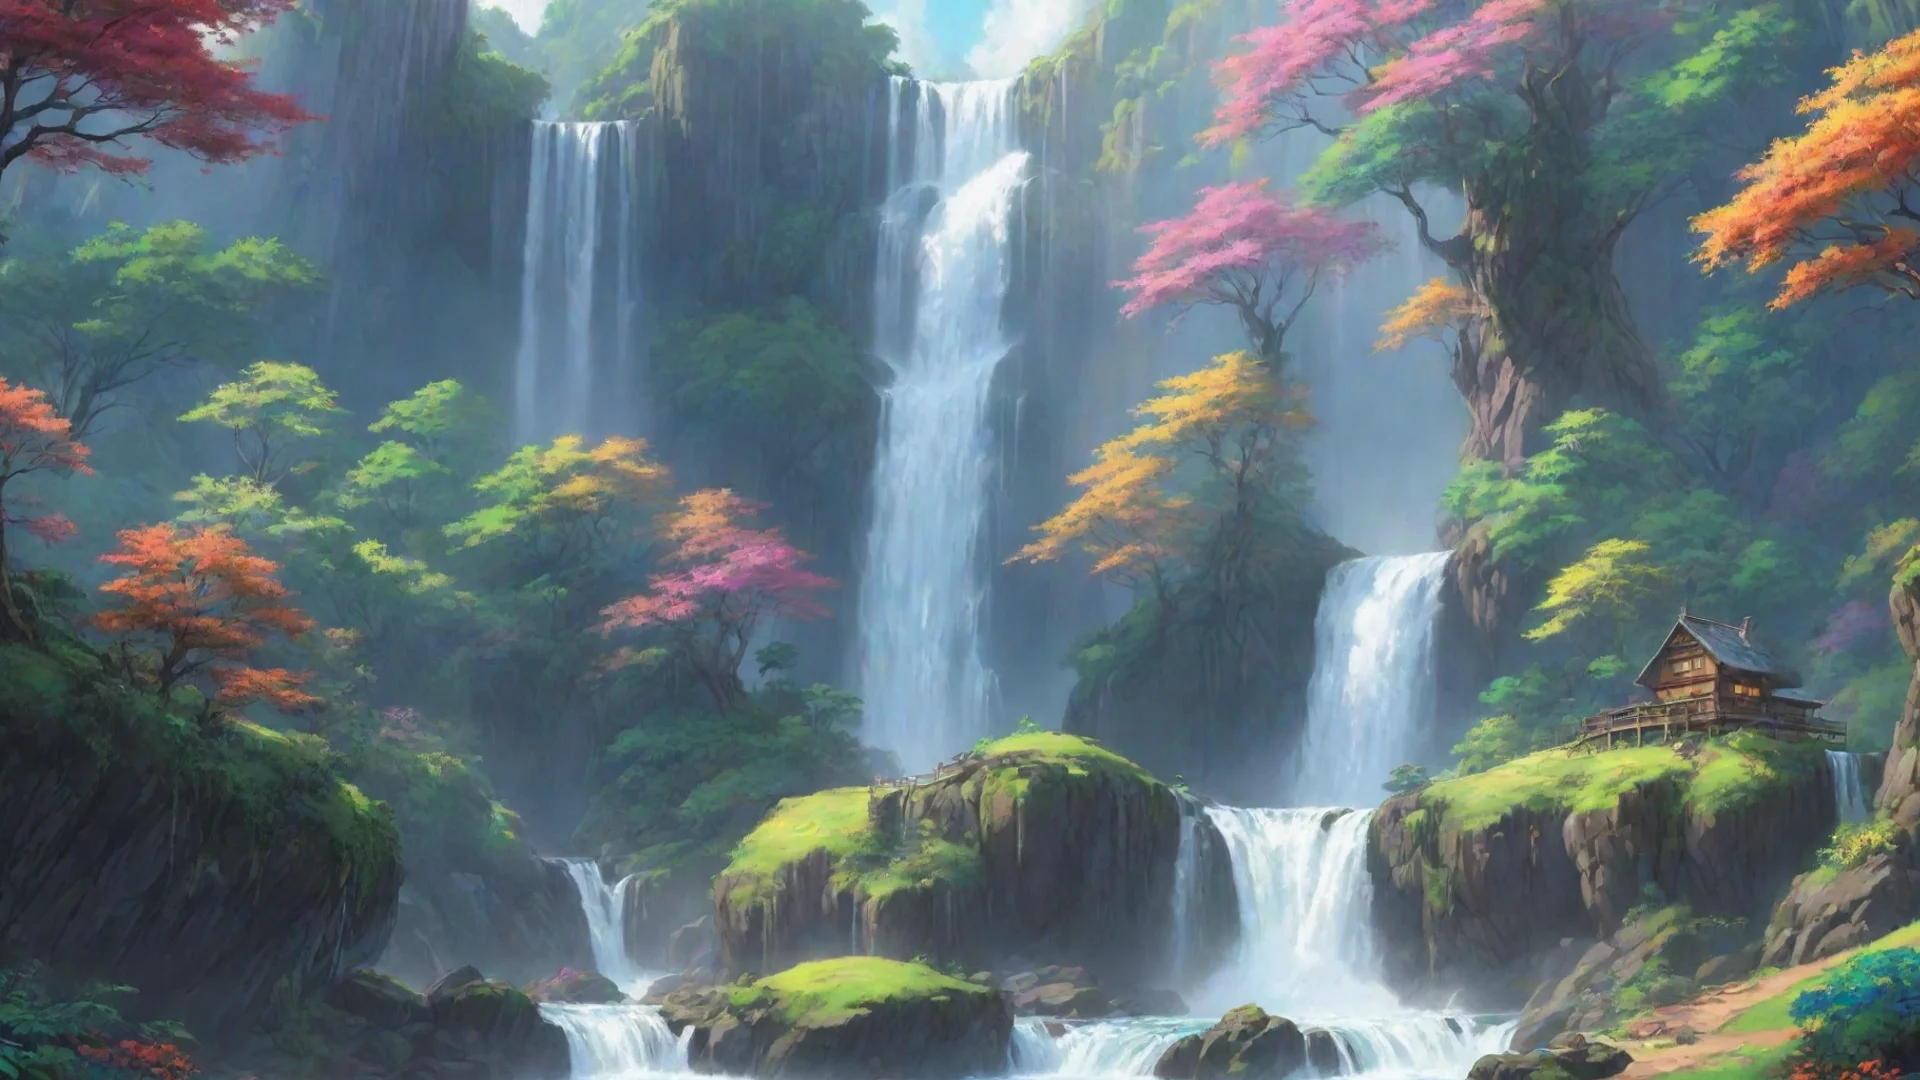 aiartstation art lowfi relaxing calming on colorful chilling relaxing with lush wonderful environment waterfalls rainbows hd ghibli fantasy fantastic confident engaging wow 3 wide